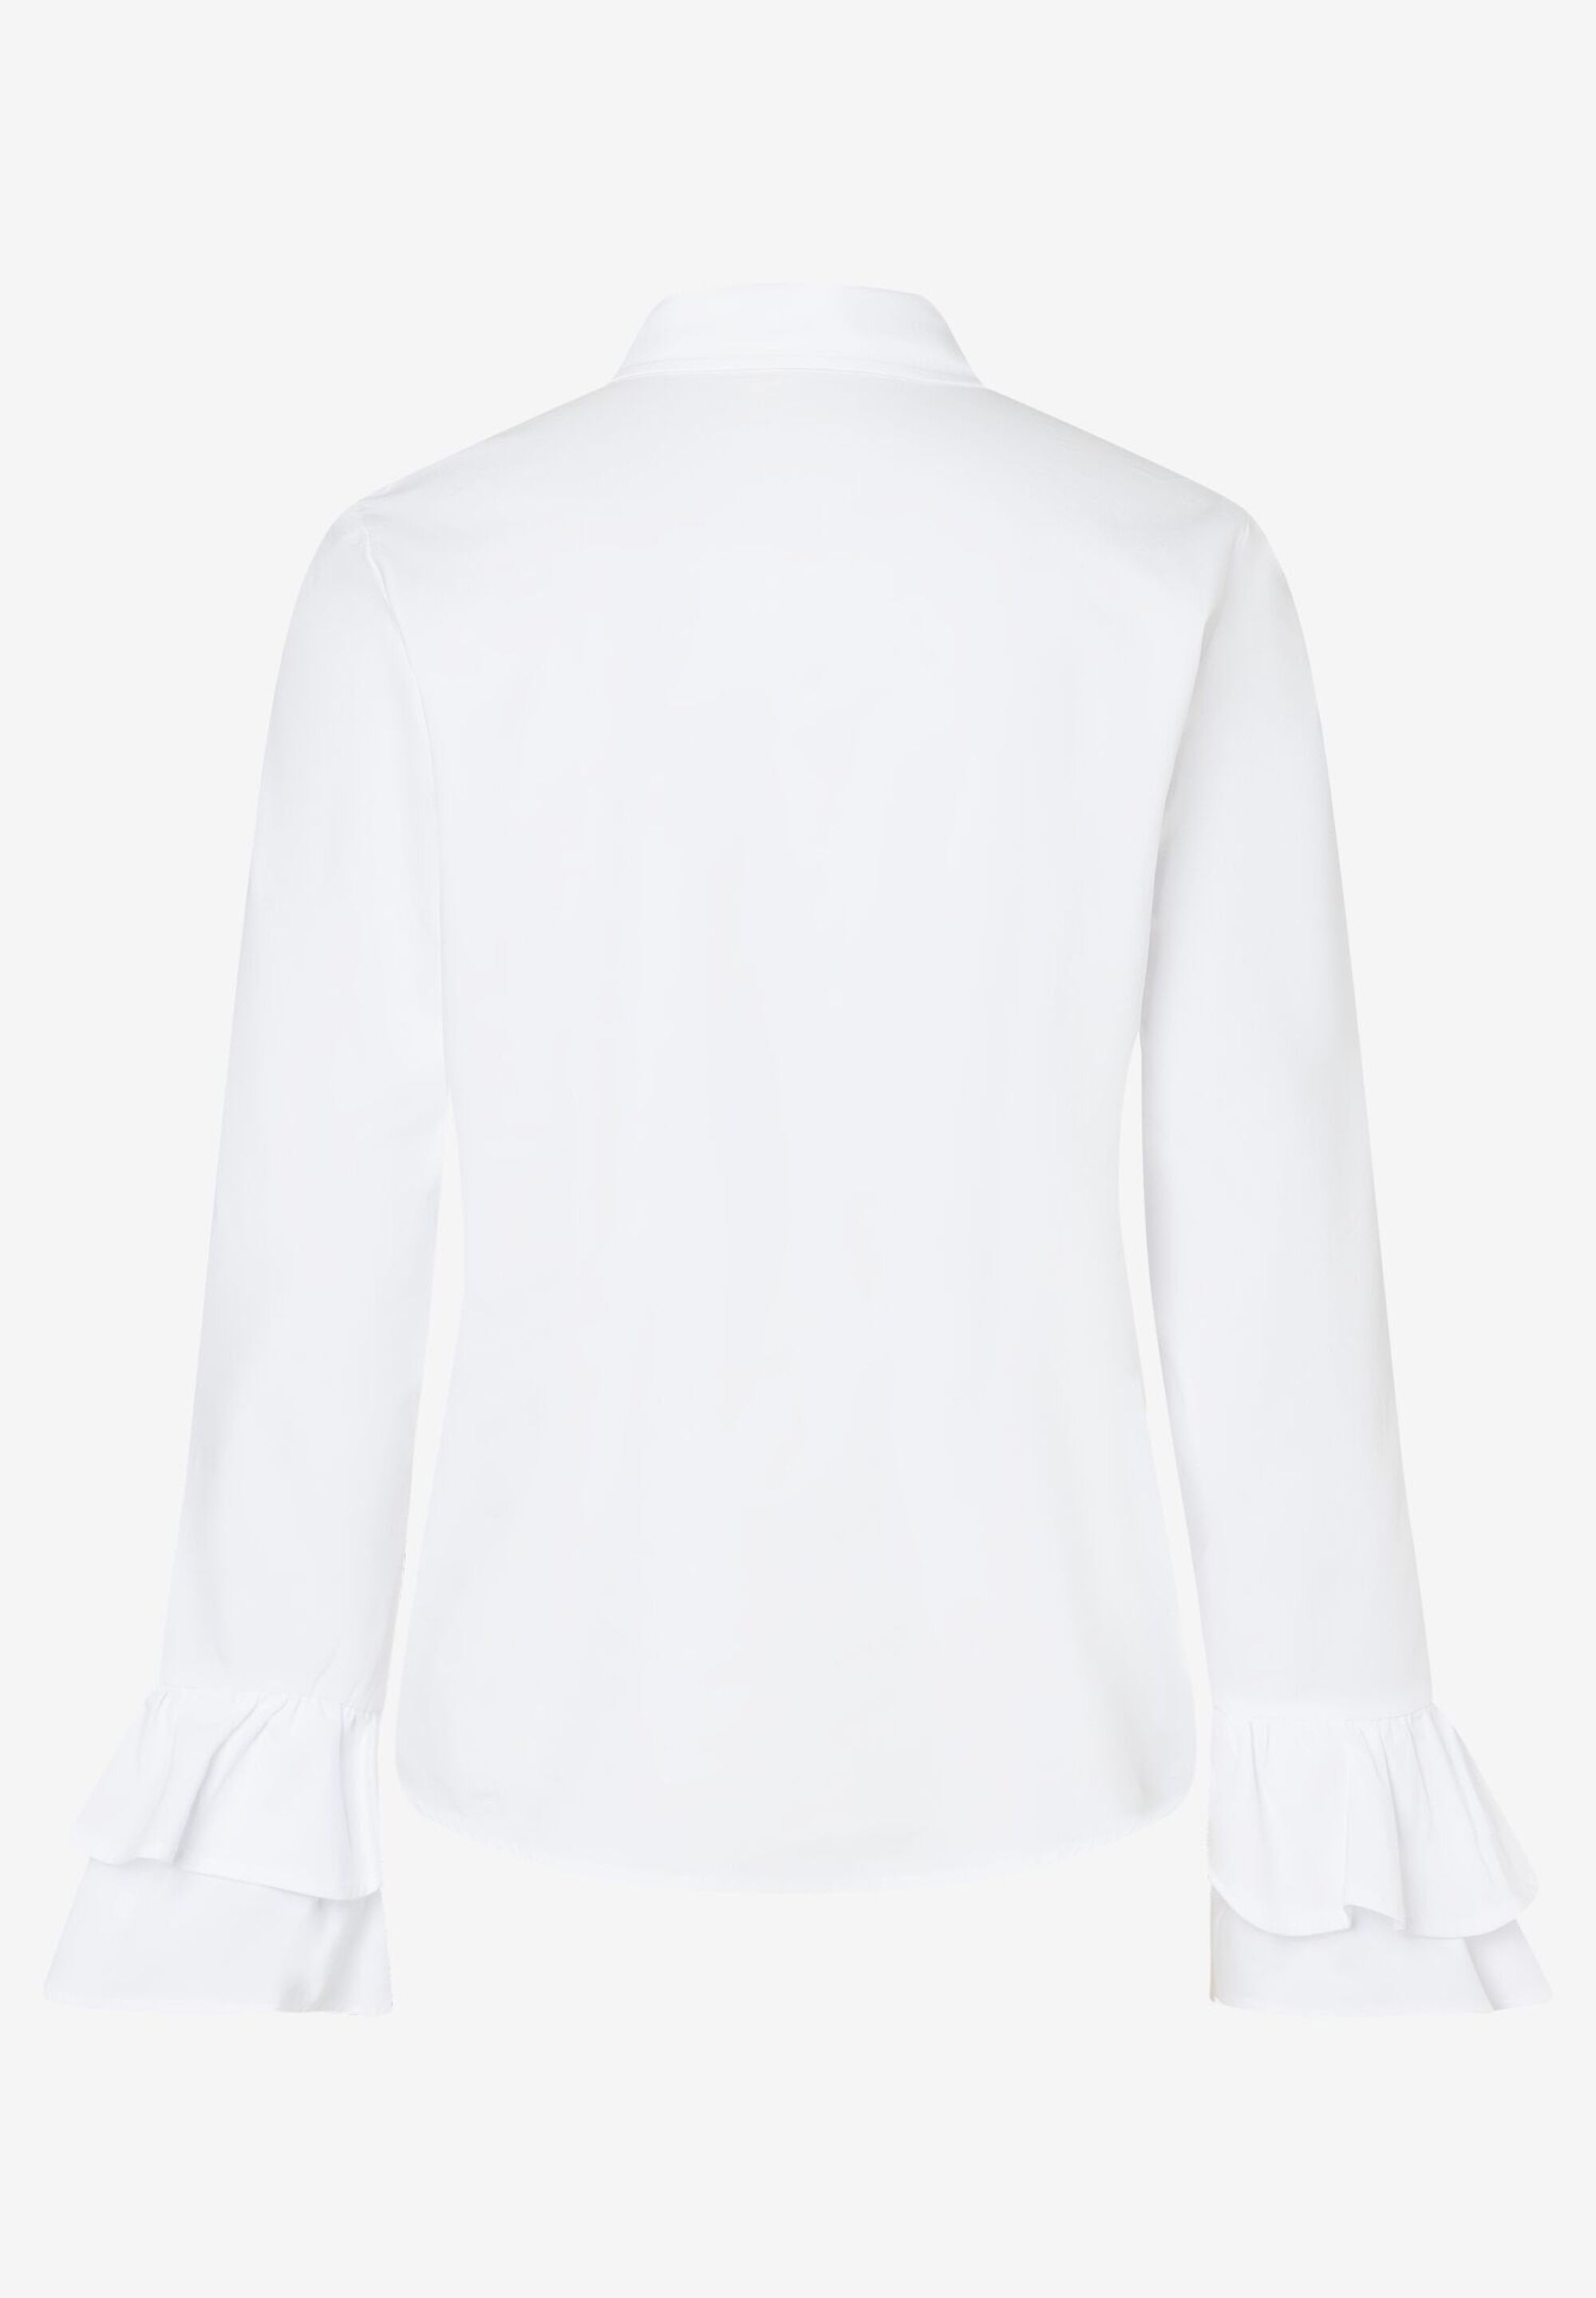 White Blouse With Statement Sleeves_41012005_0010_06